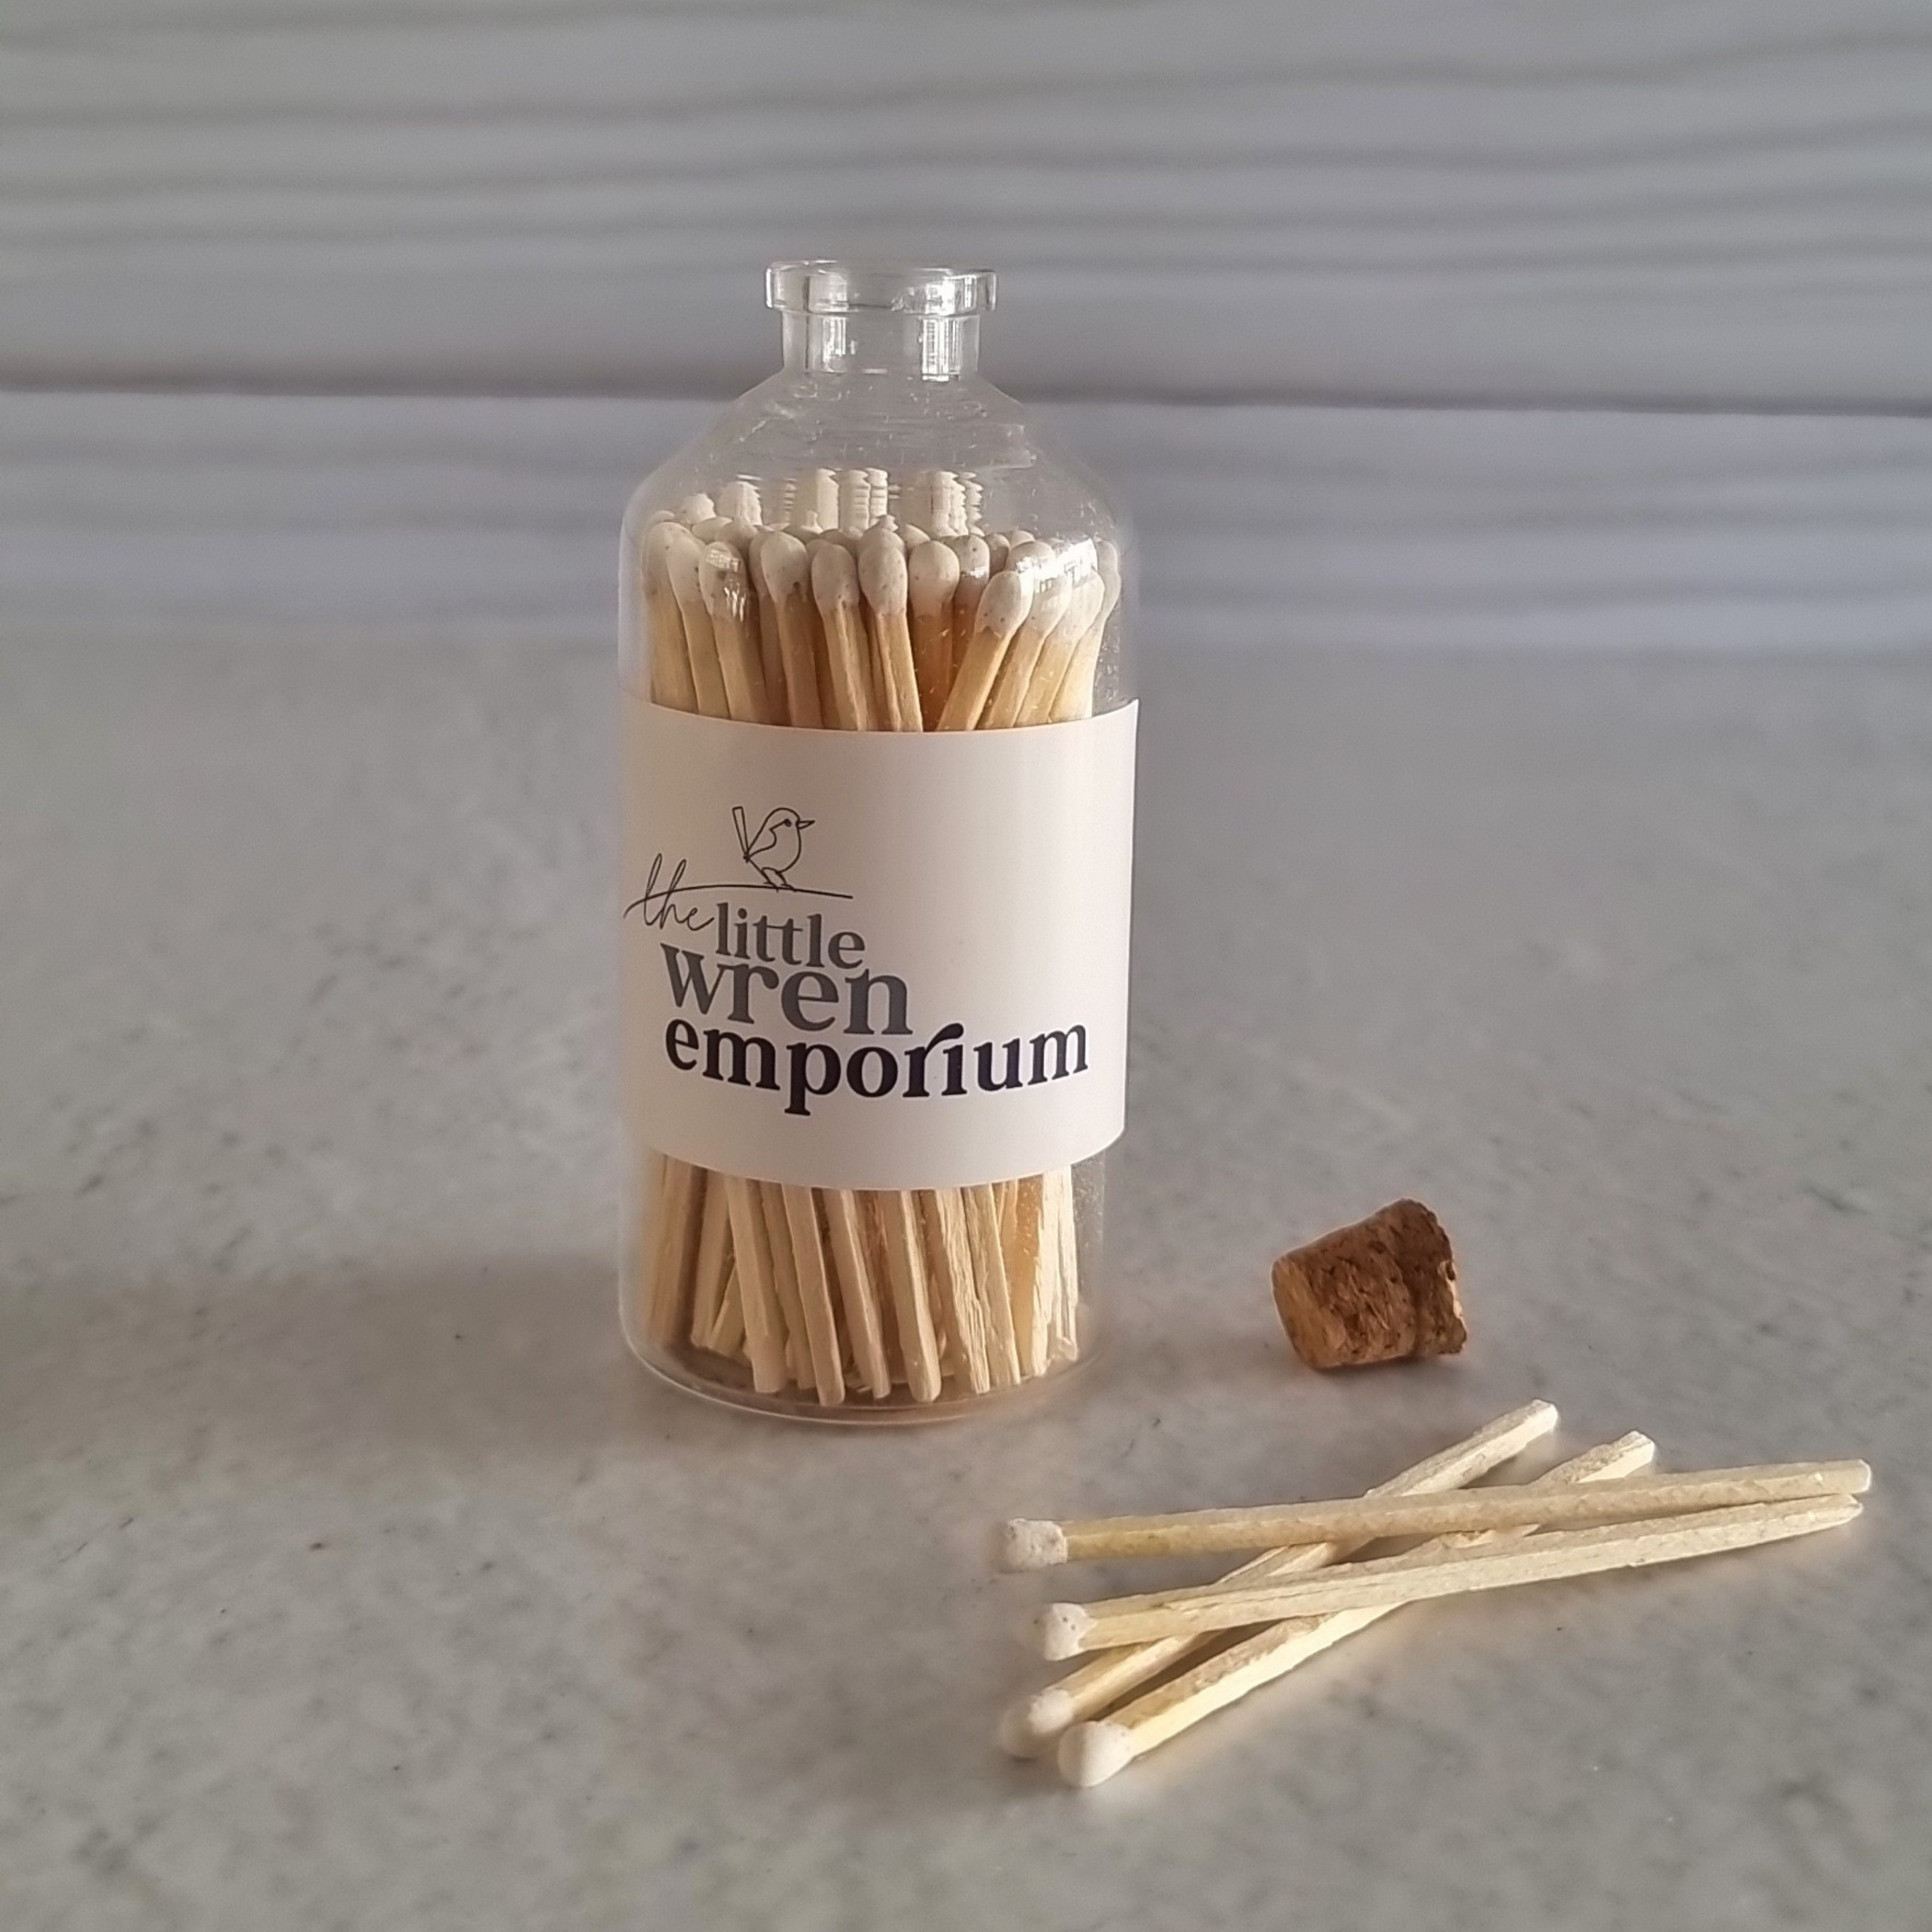 Emporium White Tipped Matches in Bottle